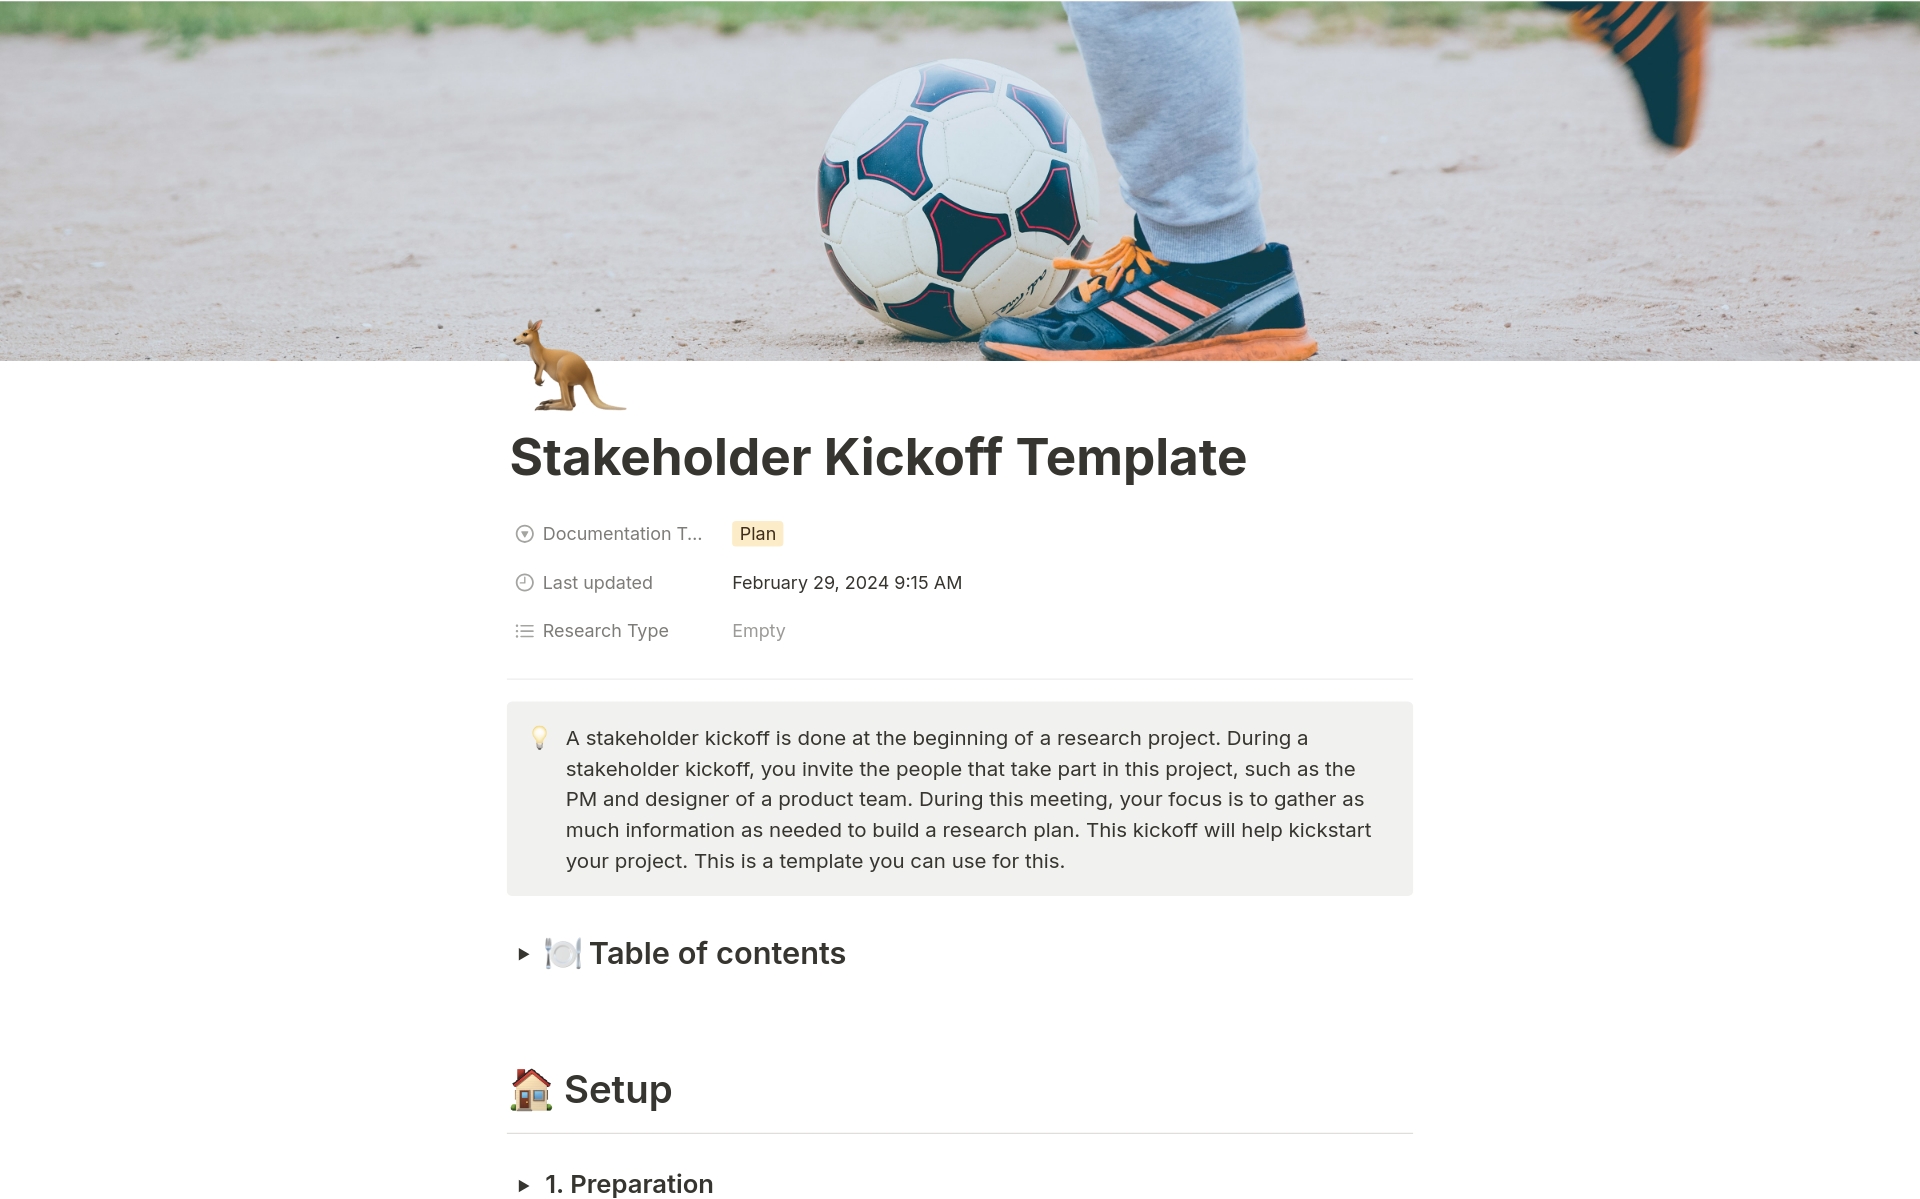 A stakeholder kickoff is done at the beginning of a research project. During a stakeholder kickoff, you invite the people that take part in this project, such as the PM and designer of a product team. 